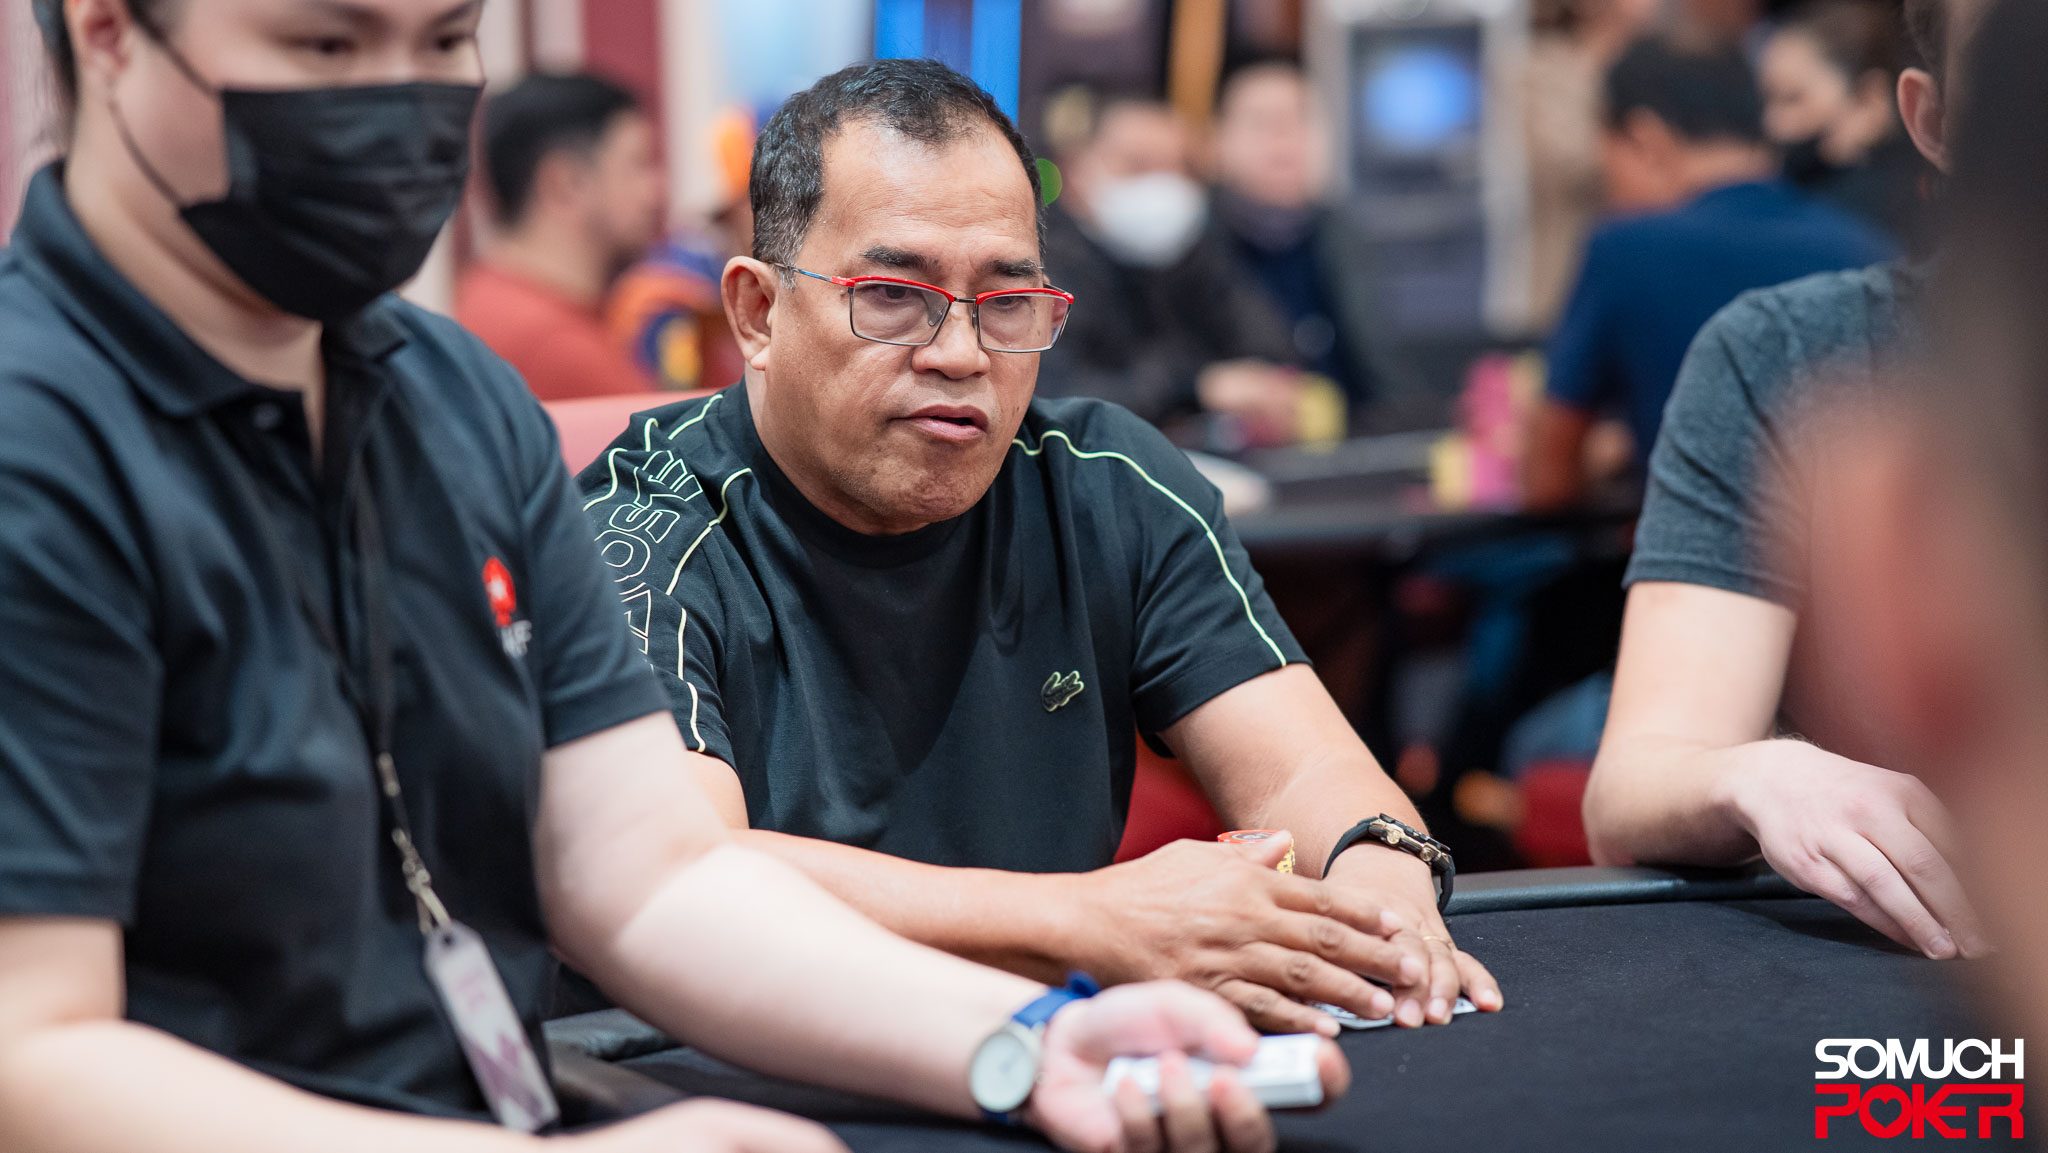 Philippines’ Alfredo Boligor leads Manila Super Series 19 Main Event Final Nine; PHP 2.2M (~USD 39K) listed up top